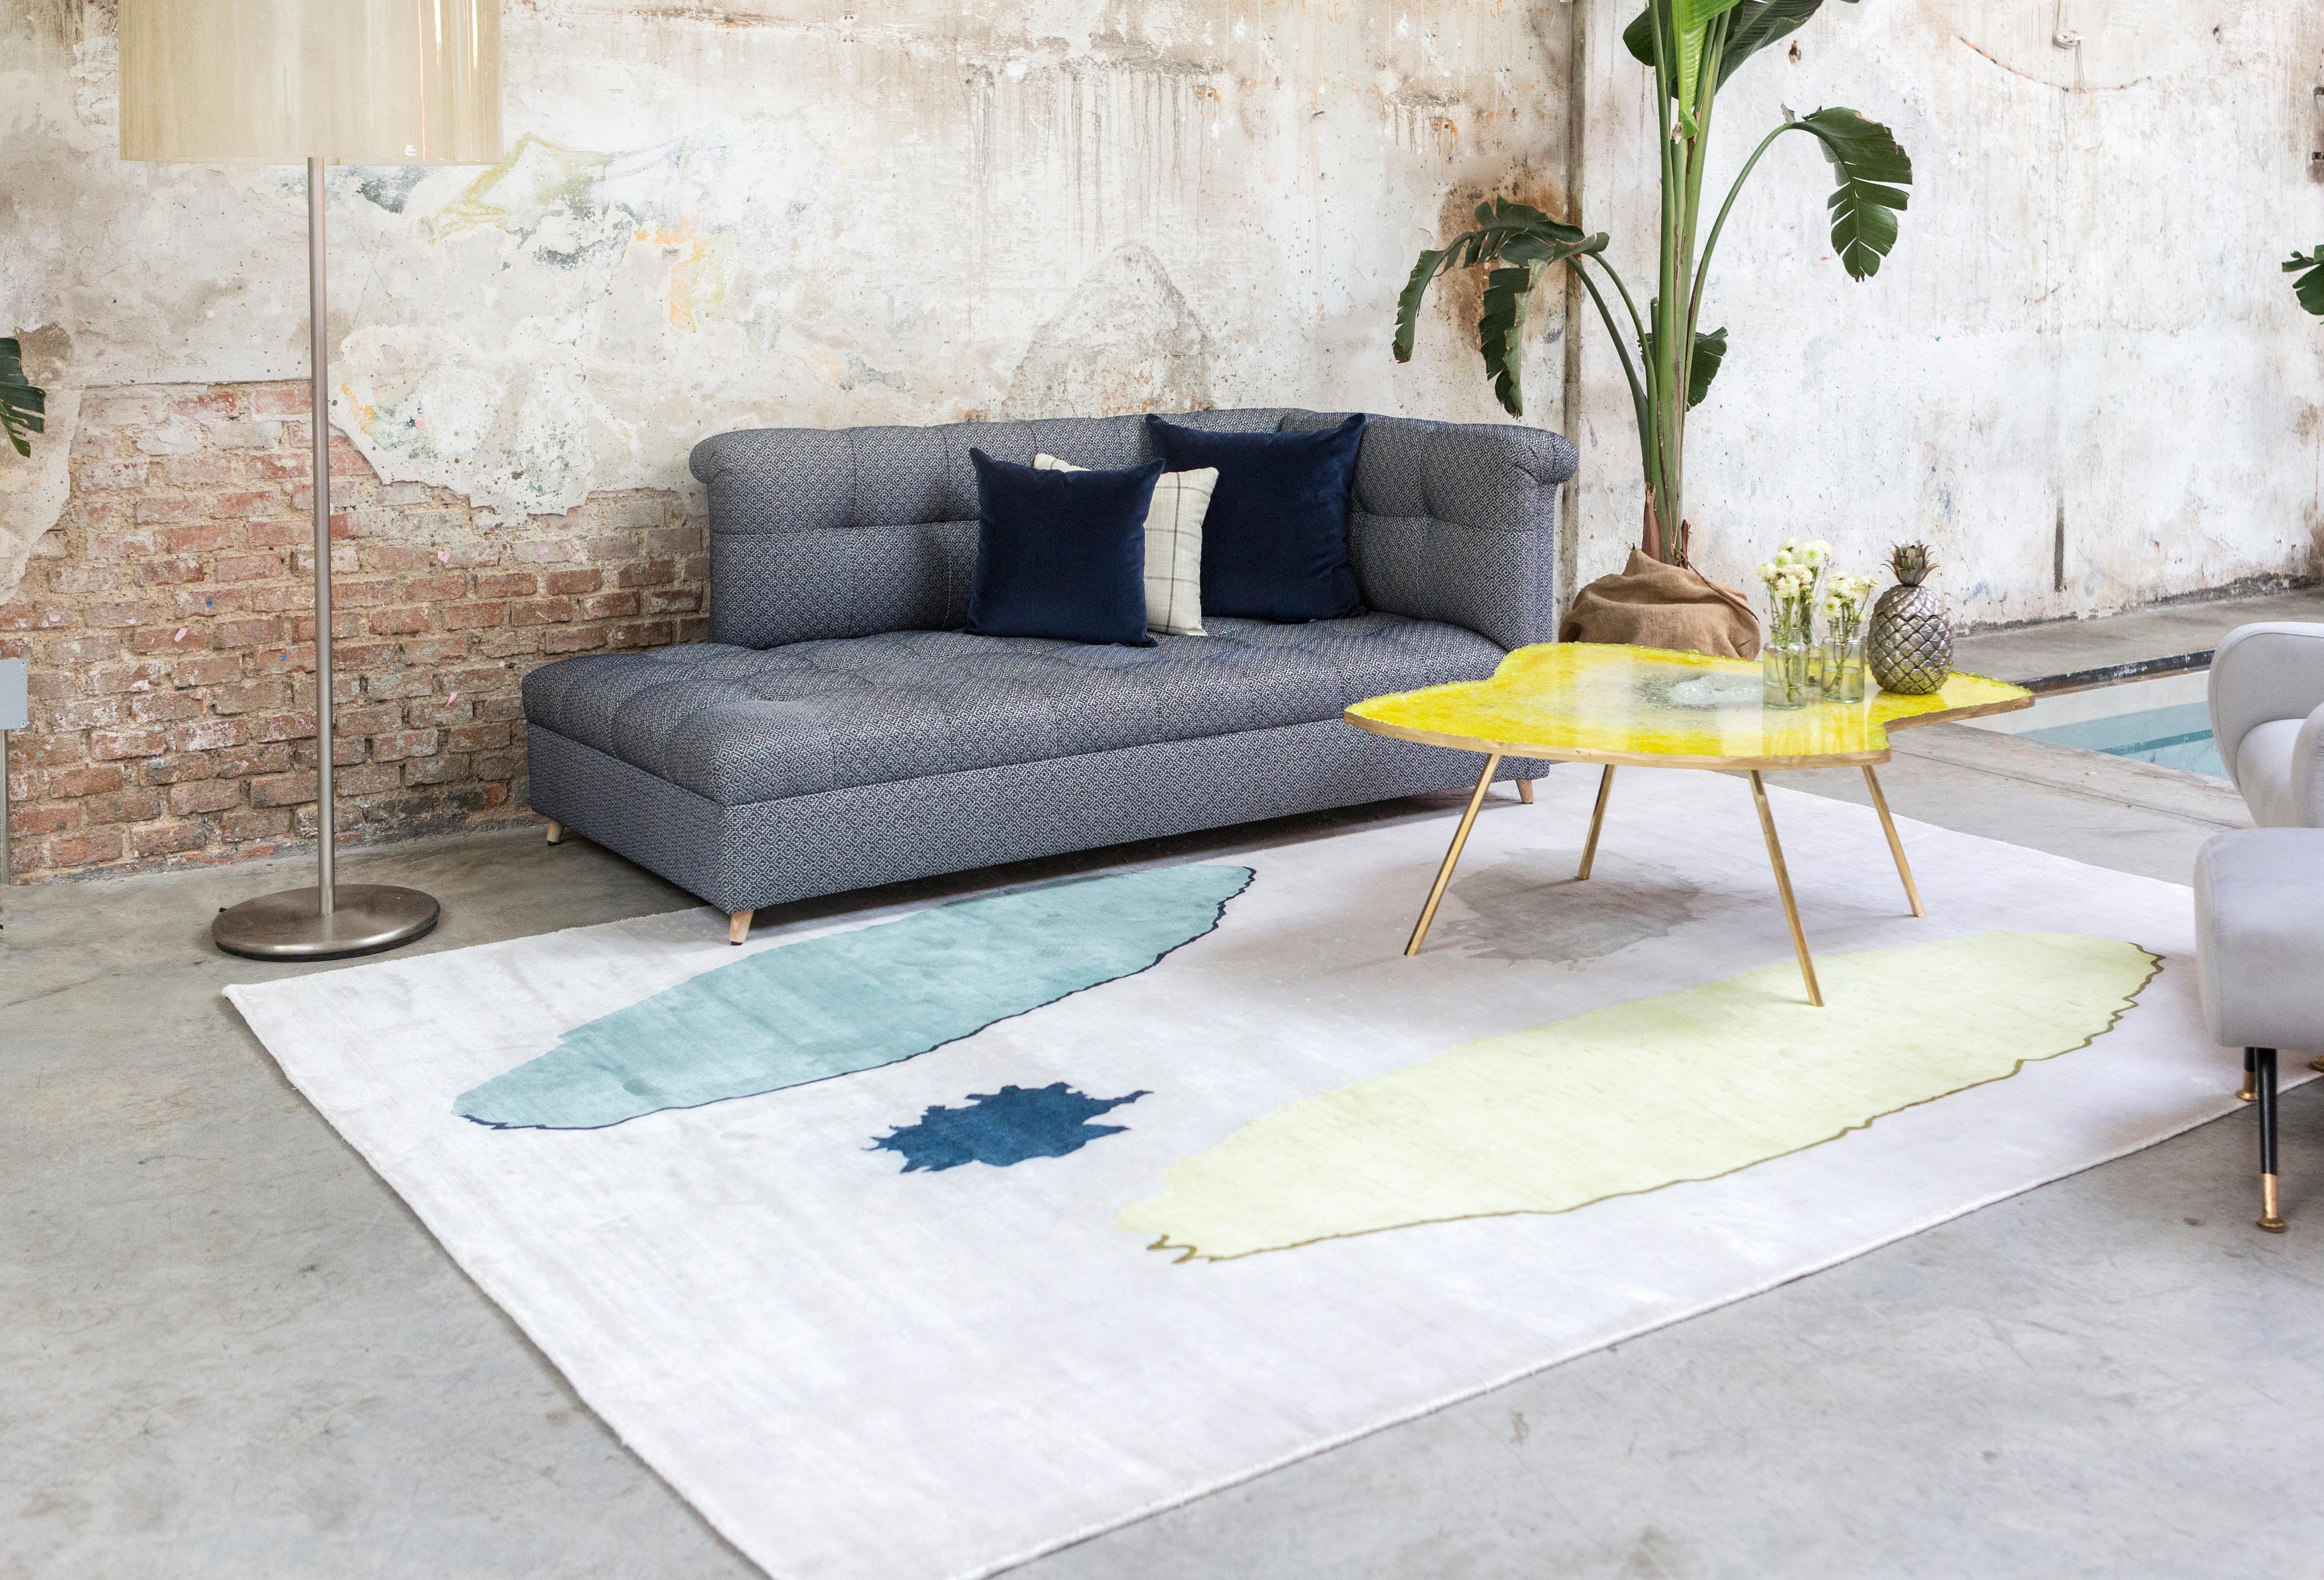 This rug has been designed by Chío León, Spanish fabric designer who has collaborated with multiple international brands specialized in fashion and interior design.

Is hand loomed and printed in Northern India.
We use only the finest yarns, 100%